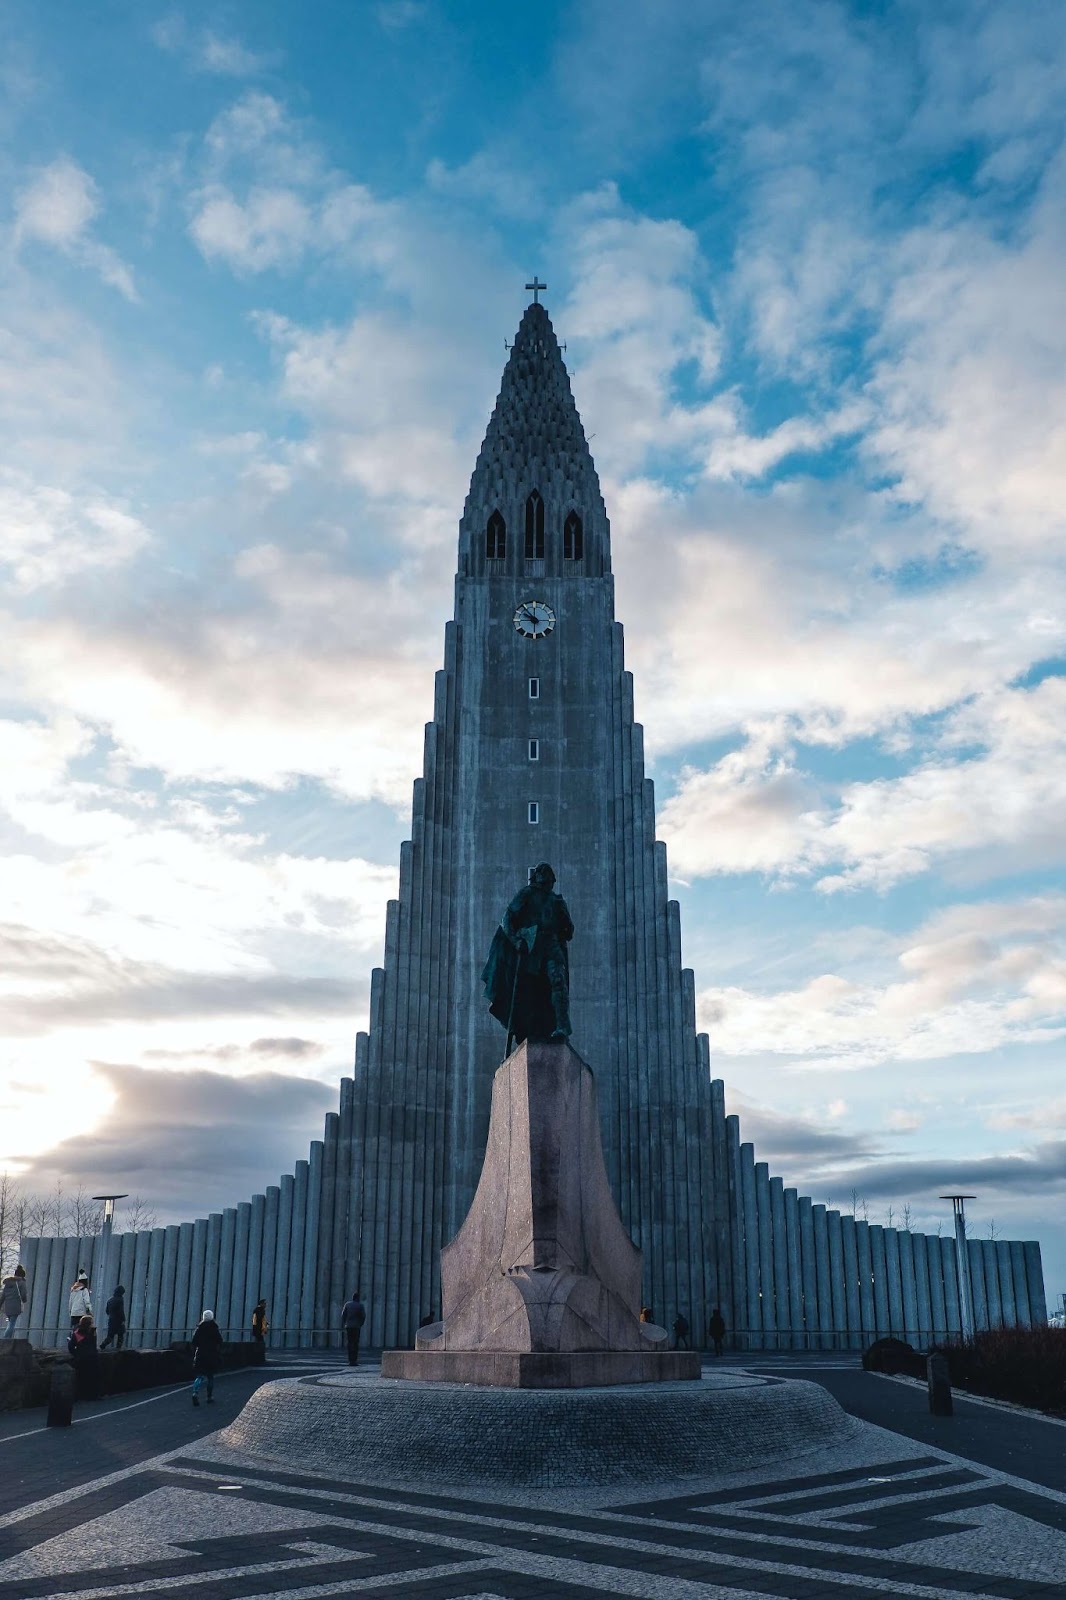 1 day in Reykjavik, Hallsgrimskirja, Church of Hallgrimur. This is the largest and tallest church in Iceland and was designed to resemble the rocks, ice, and landscape of Iceland.